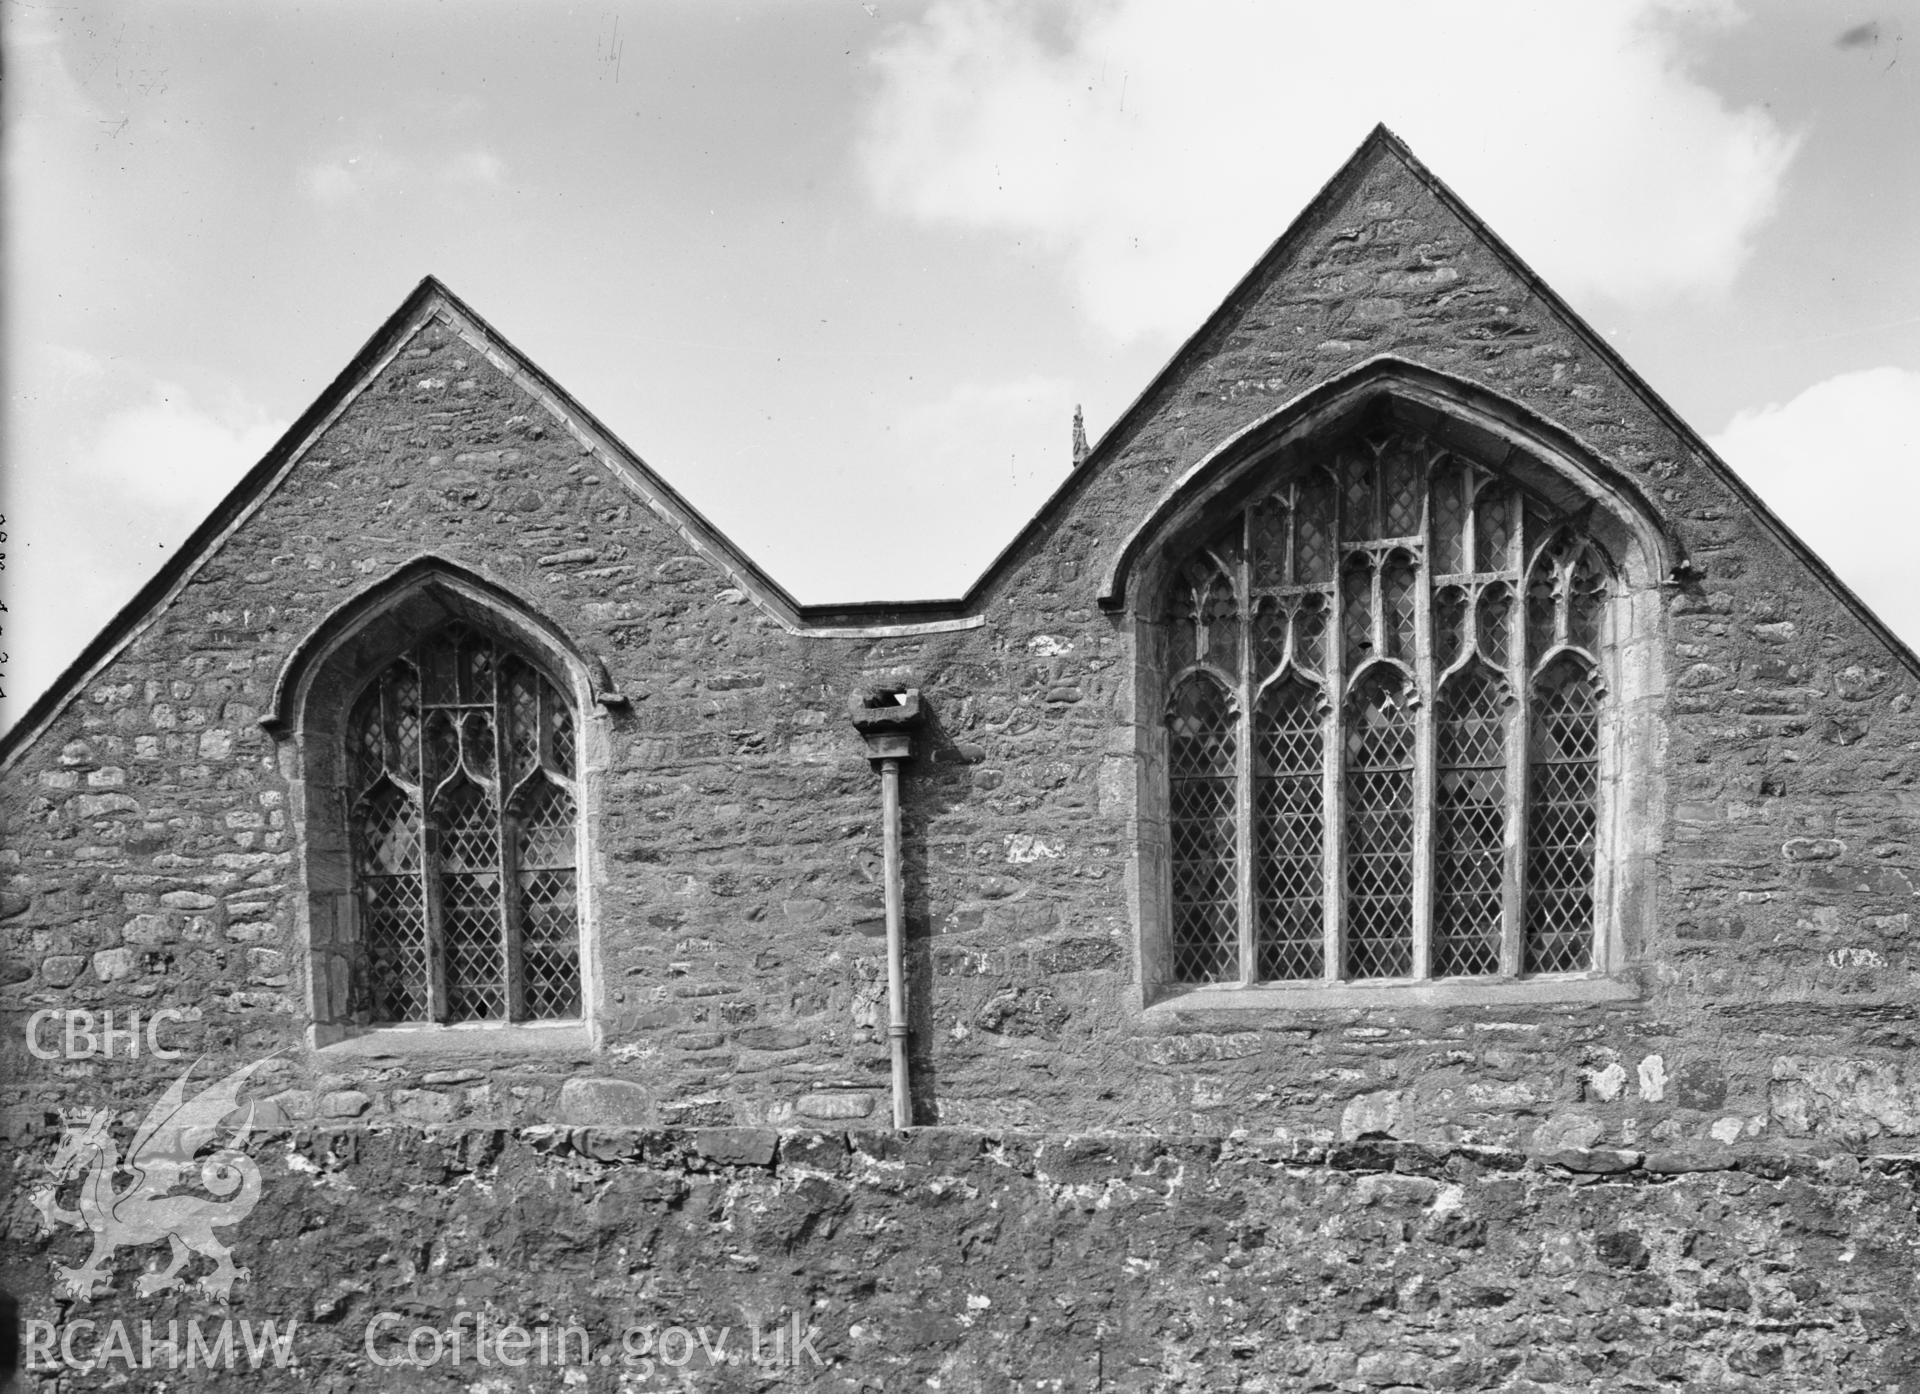 Exterior view showing the east end.